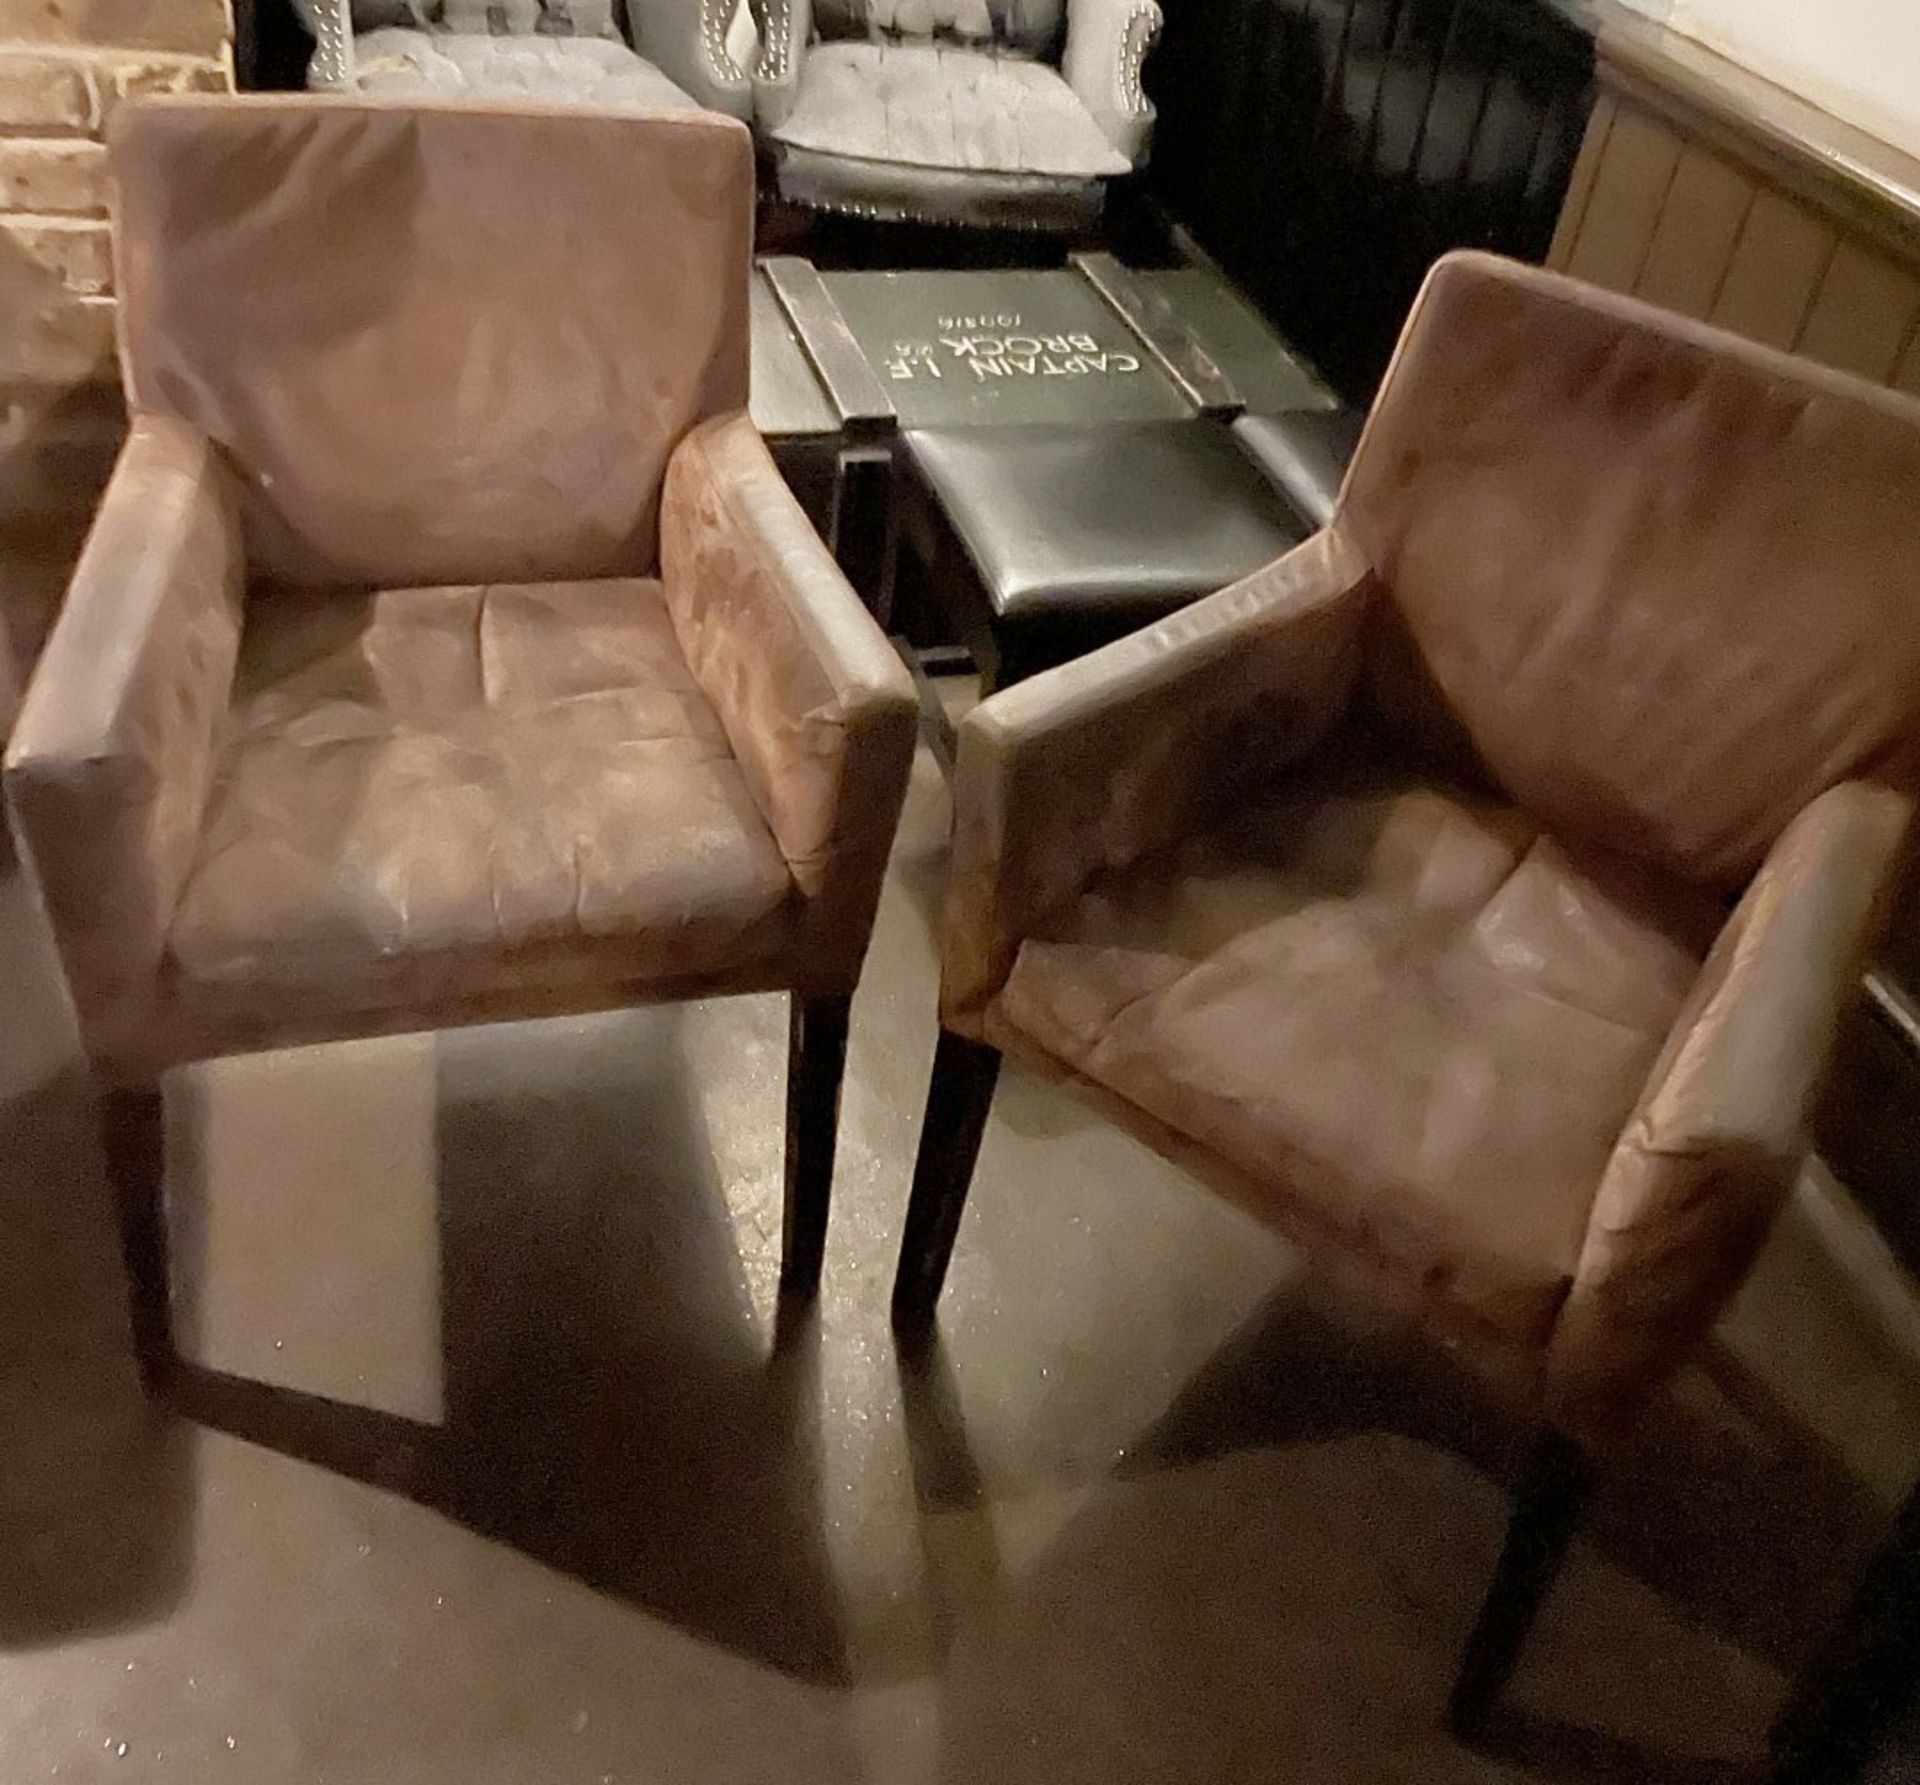 2 x Vintage Stage Chairs Featuring a Distressed Buckskin-style Upholstery and Solid Wood Legs - Image 2 of 2